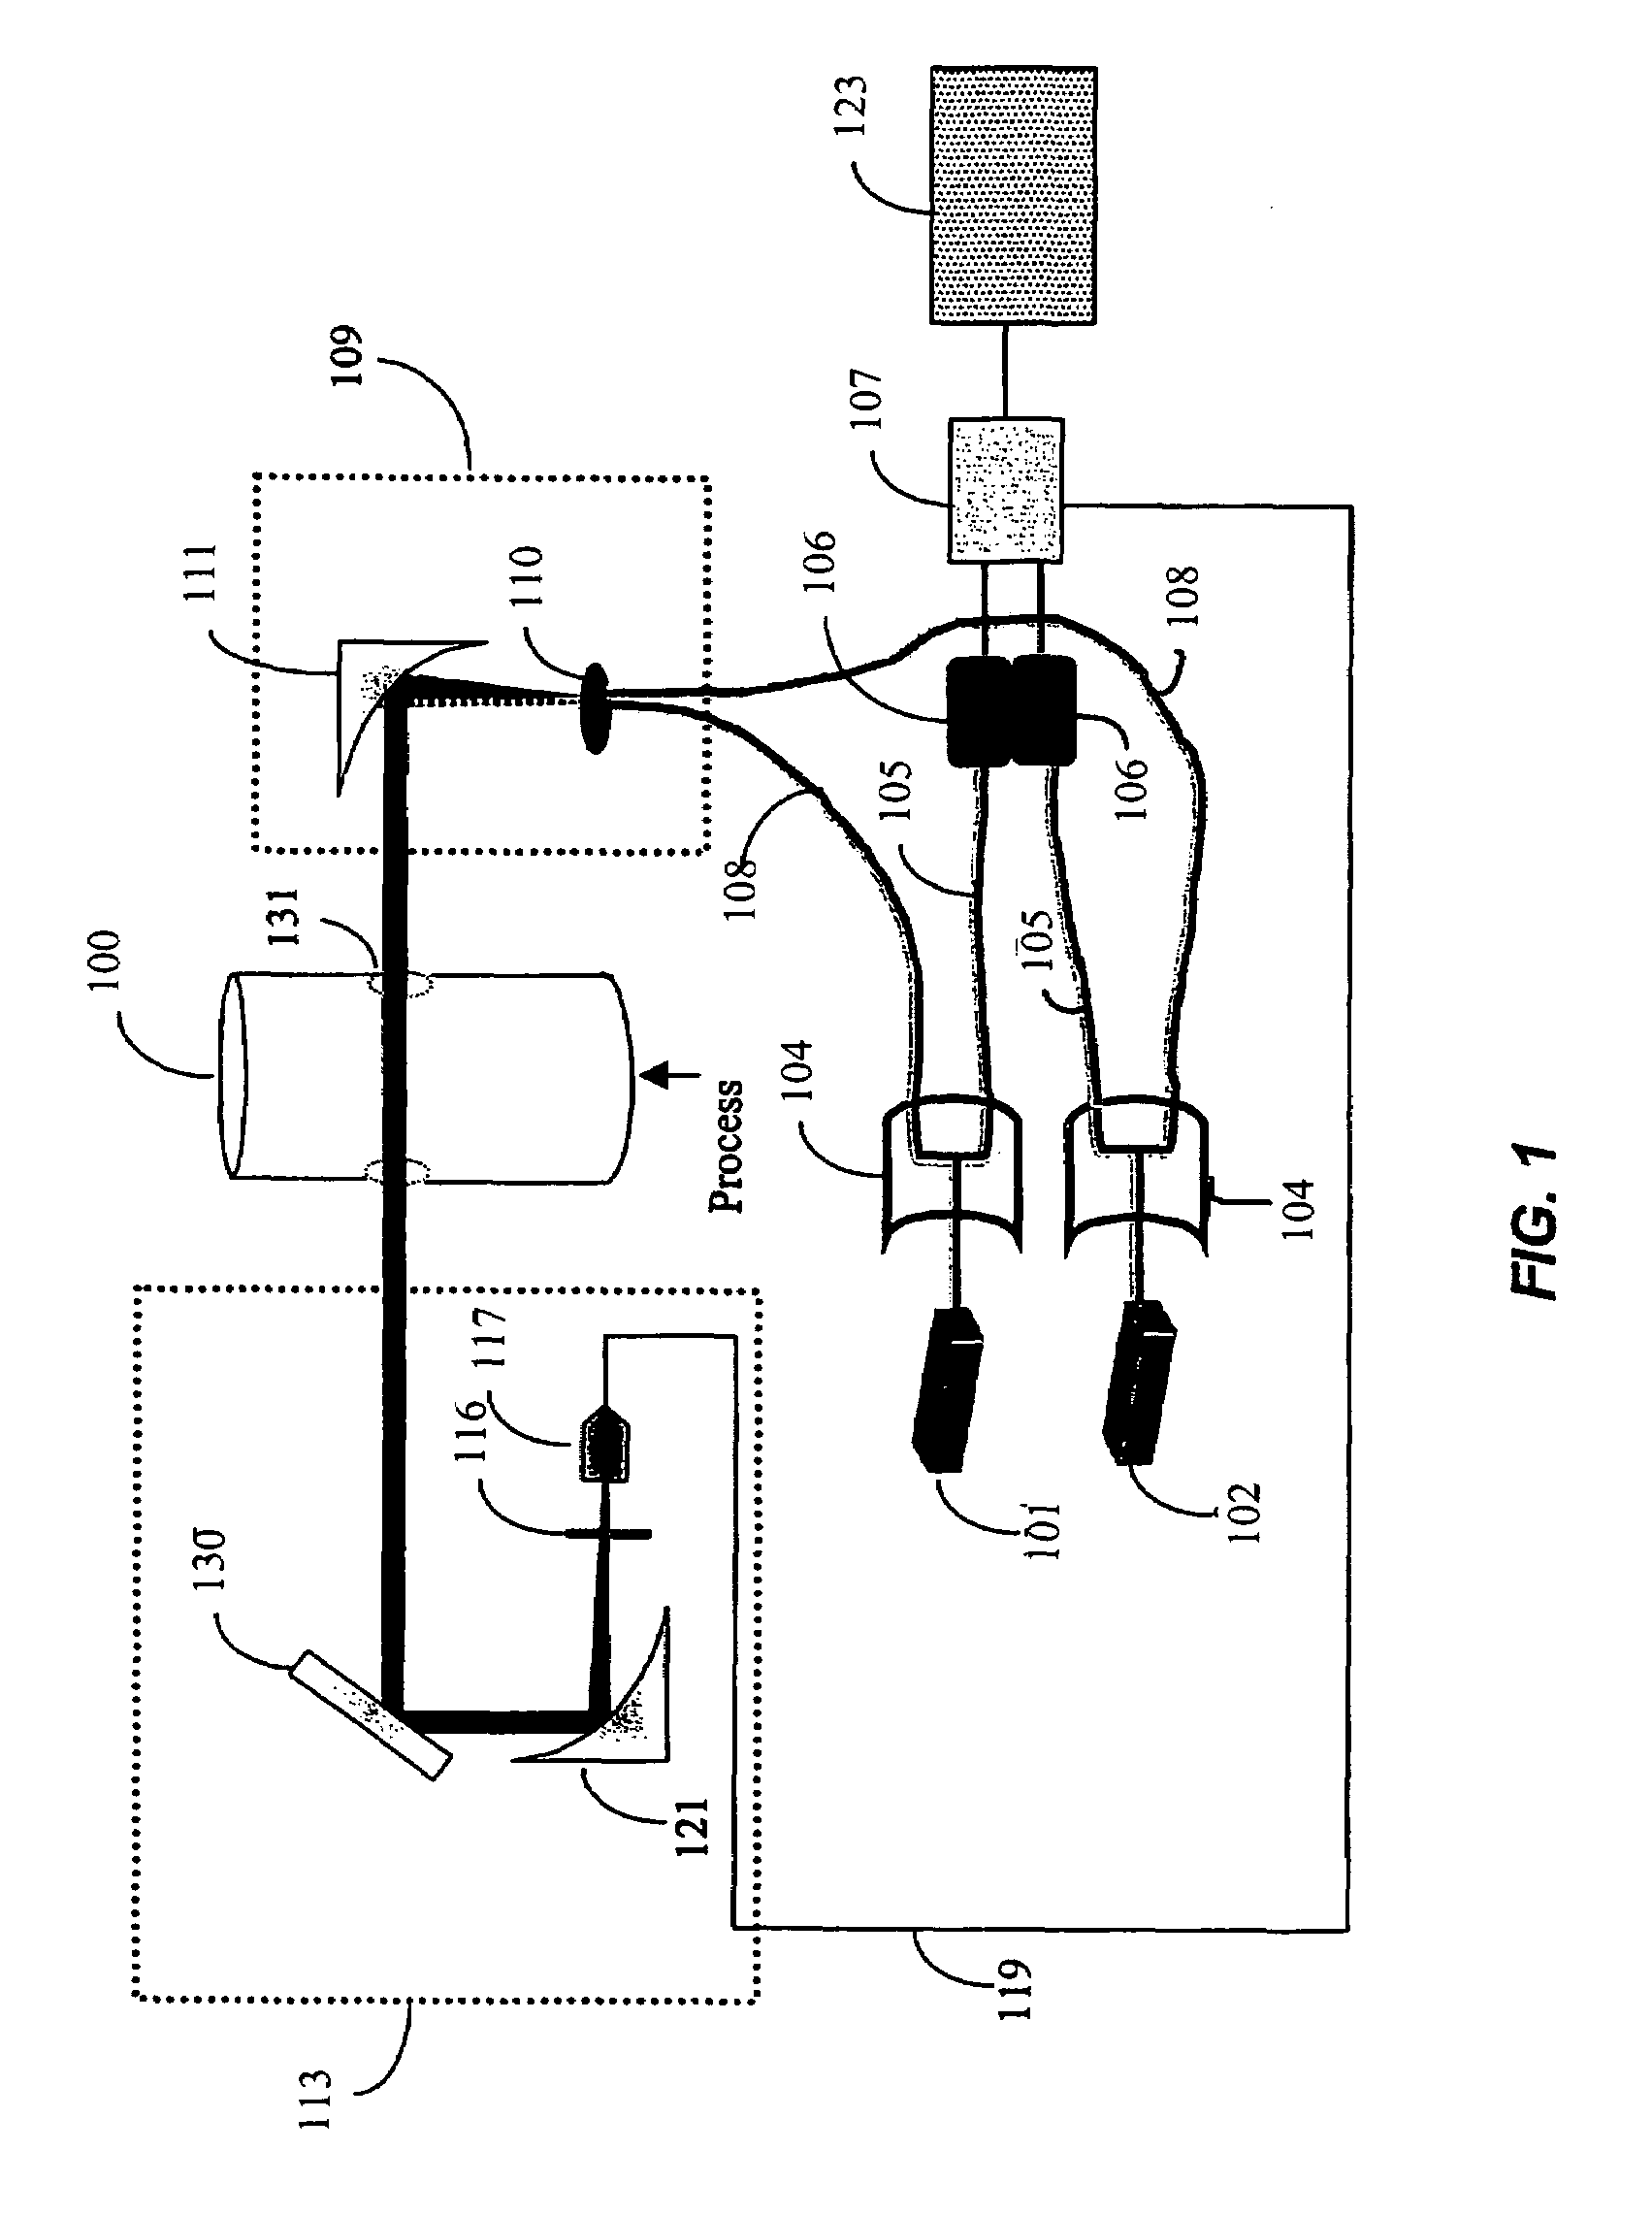 Apparatus and methods for launching and receiving a broad wavelength range source